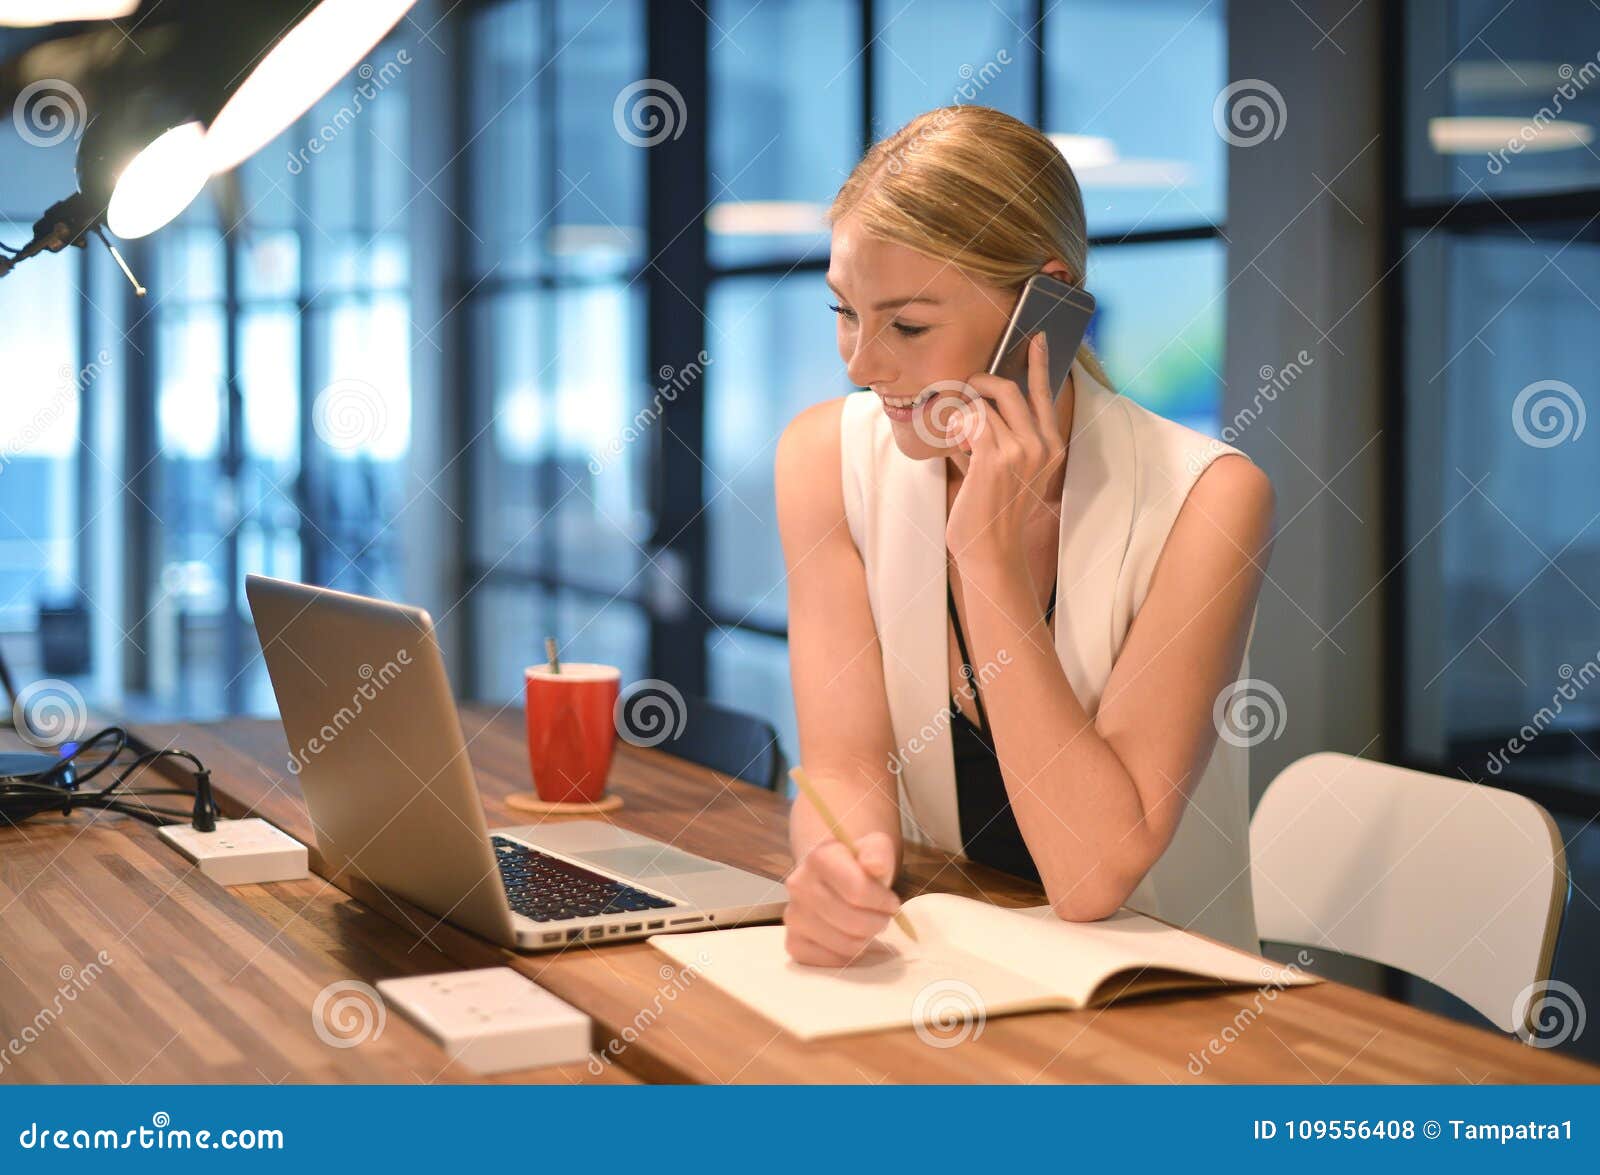 Blonde woman writing in library - wide 6